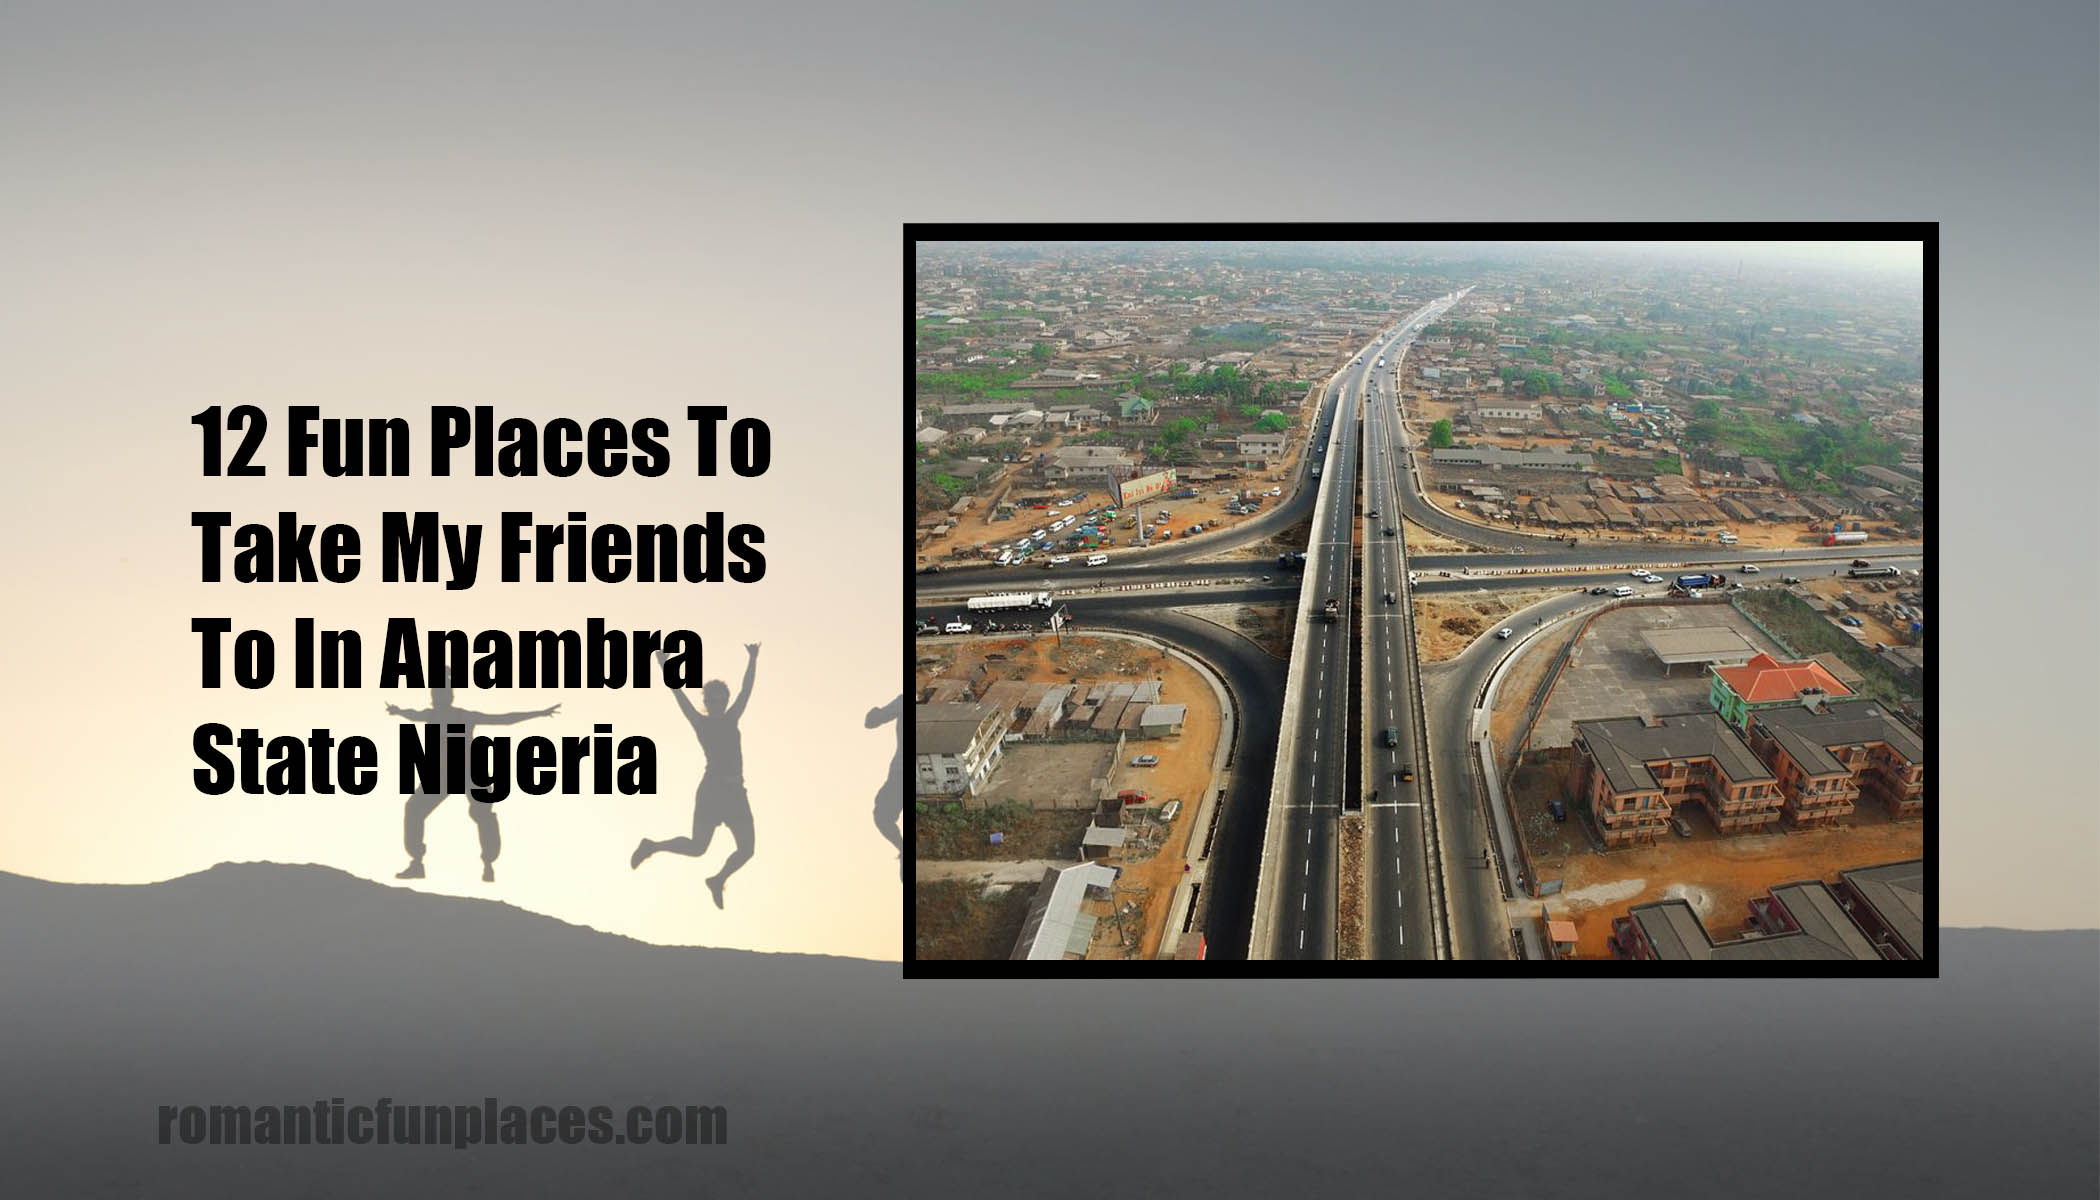 12 Fun Places To Take My Friends To In Anambra State Nigeria